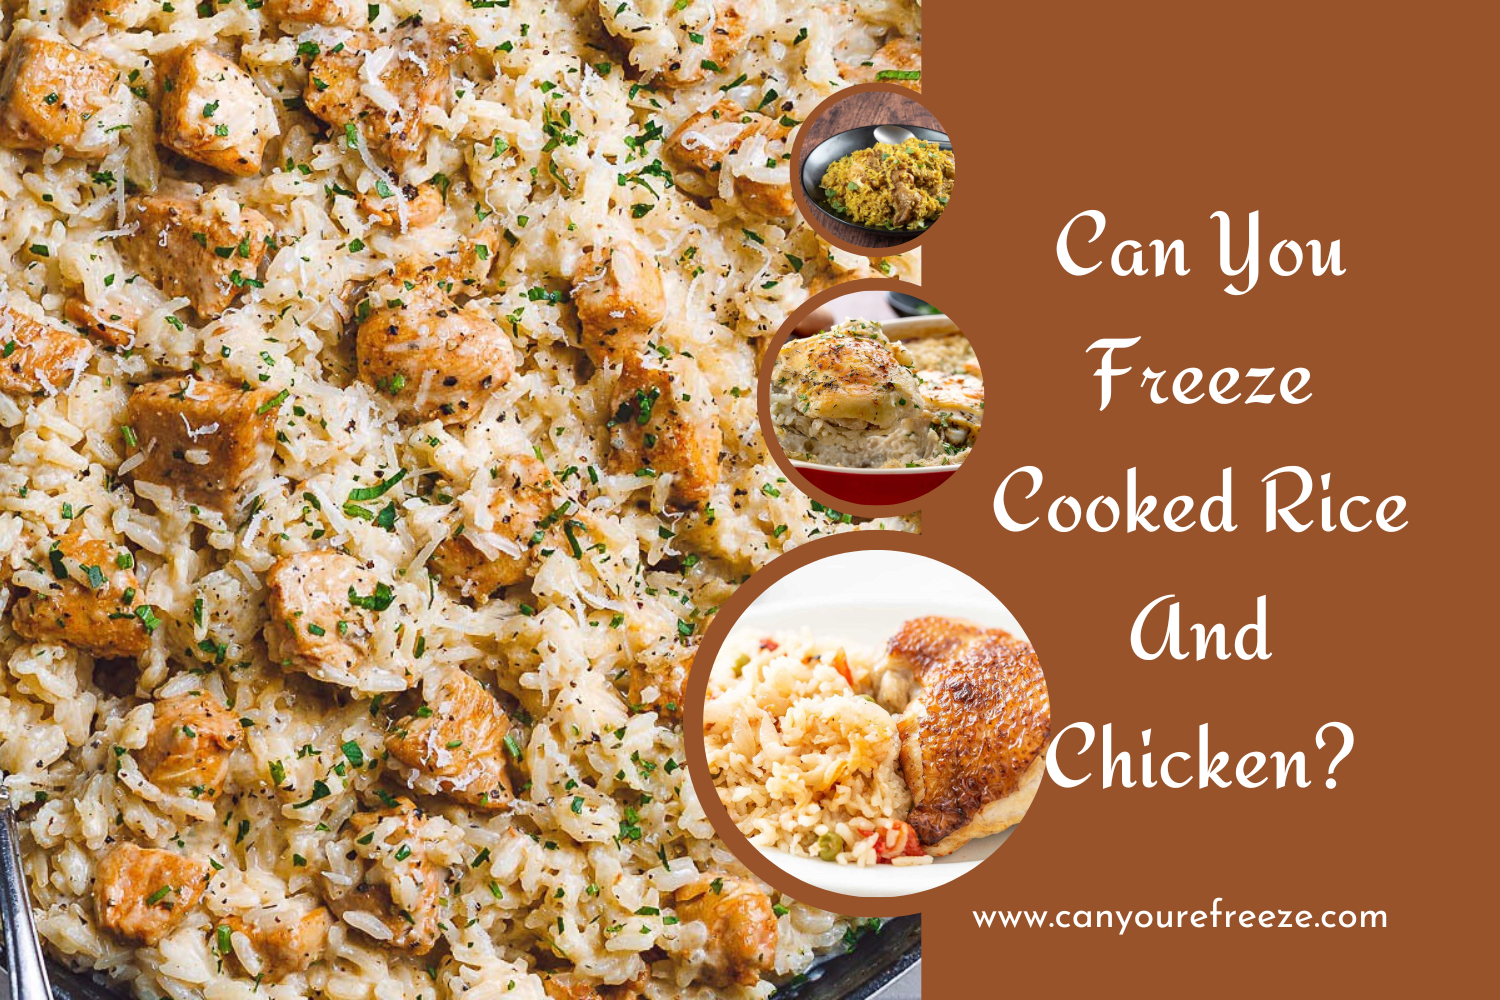 Can You Freeze Cooked Rice And Chicken